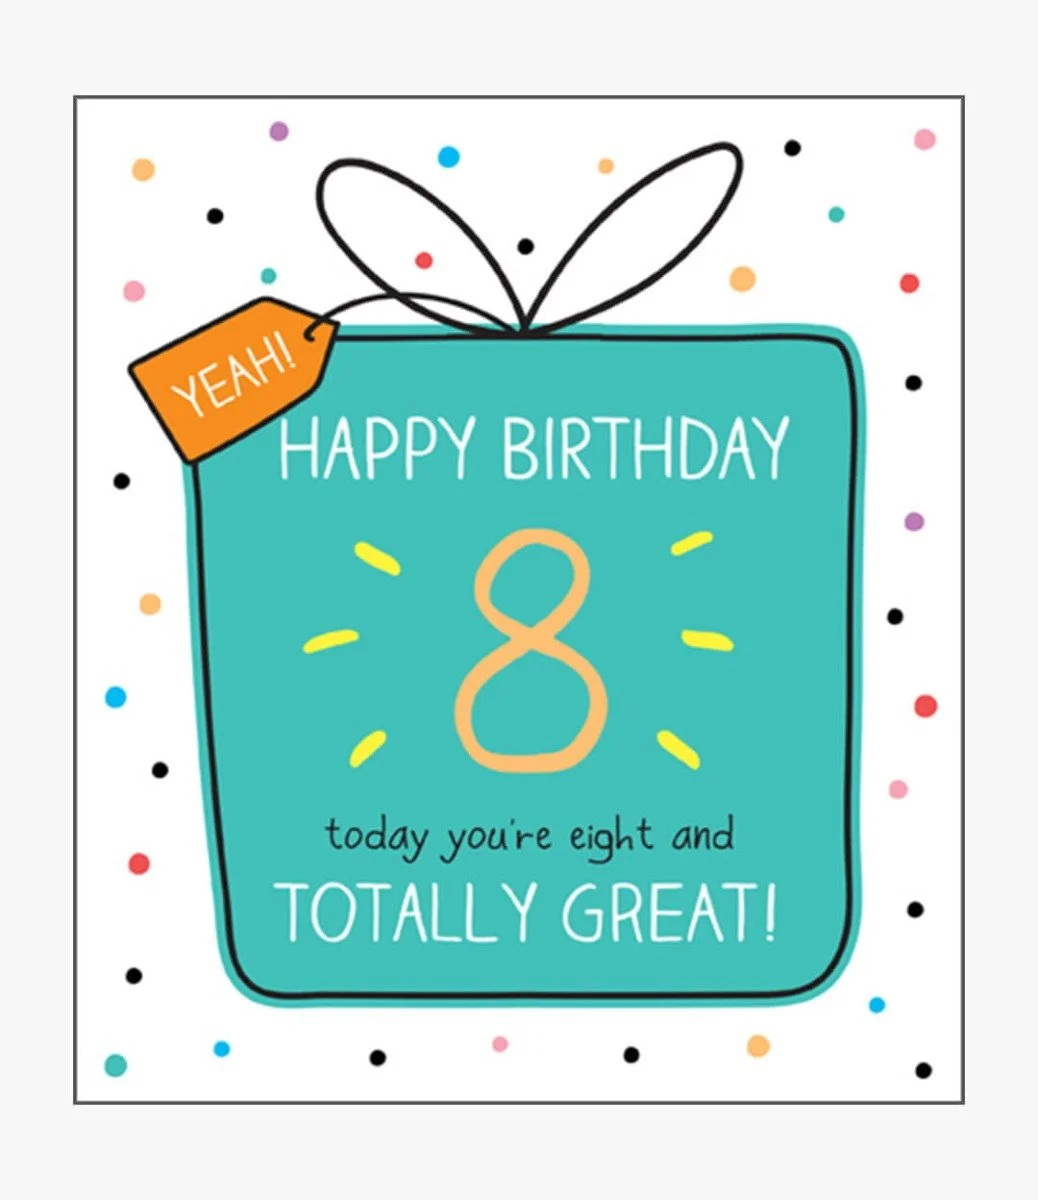 8 And Totally Great! Greeting Card by Happy Jackson